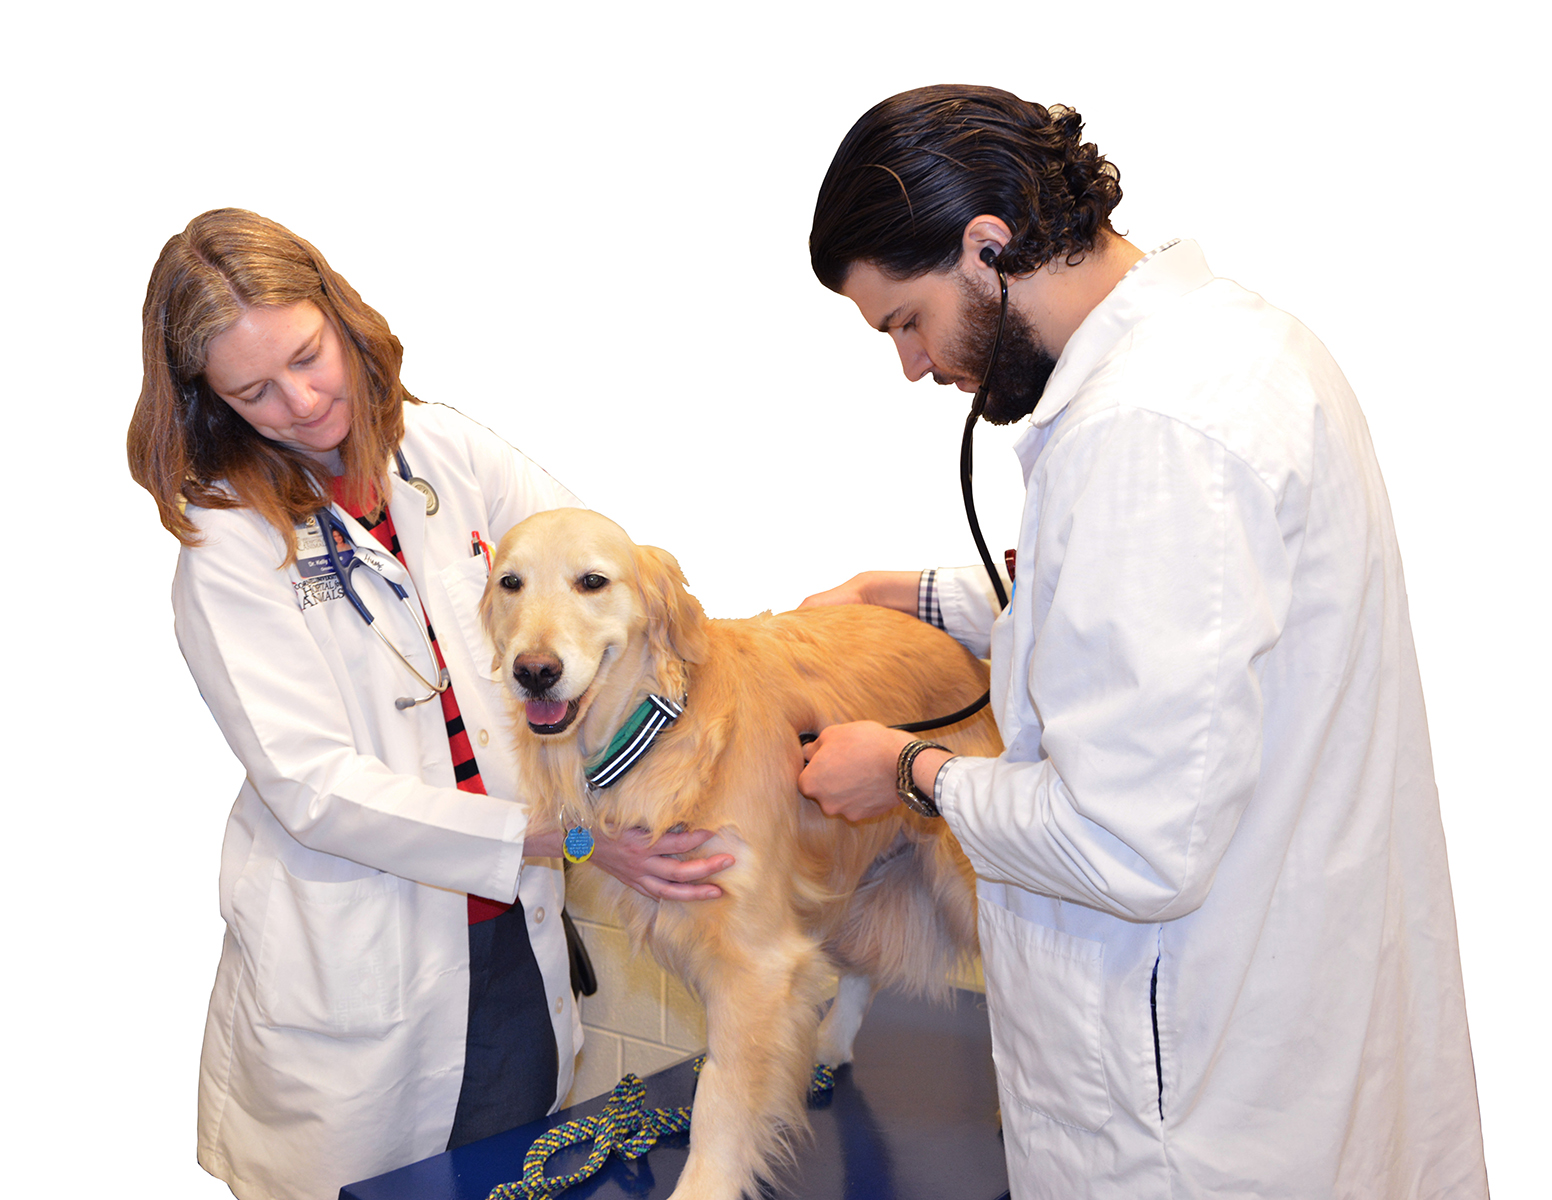 Veterinary oncologists Kelly Hume, left, and Vincent Baldanza examine Sophie, a dog with lymphoma, at the Cornell University Hospital for Animals. Lymphoma in dogs is remarkably similar to lymphoma in humans, and researchers hope that studies of the canine cancer can help humans with the disease. Hume is a Cornell faculty member, and Baldanza, a resident veterinarian at the time, is now a veterinary oncologist in California (photo courtesy of Cornell University Hospital for Animals)